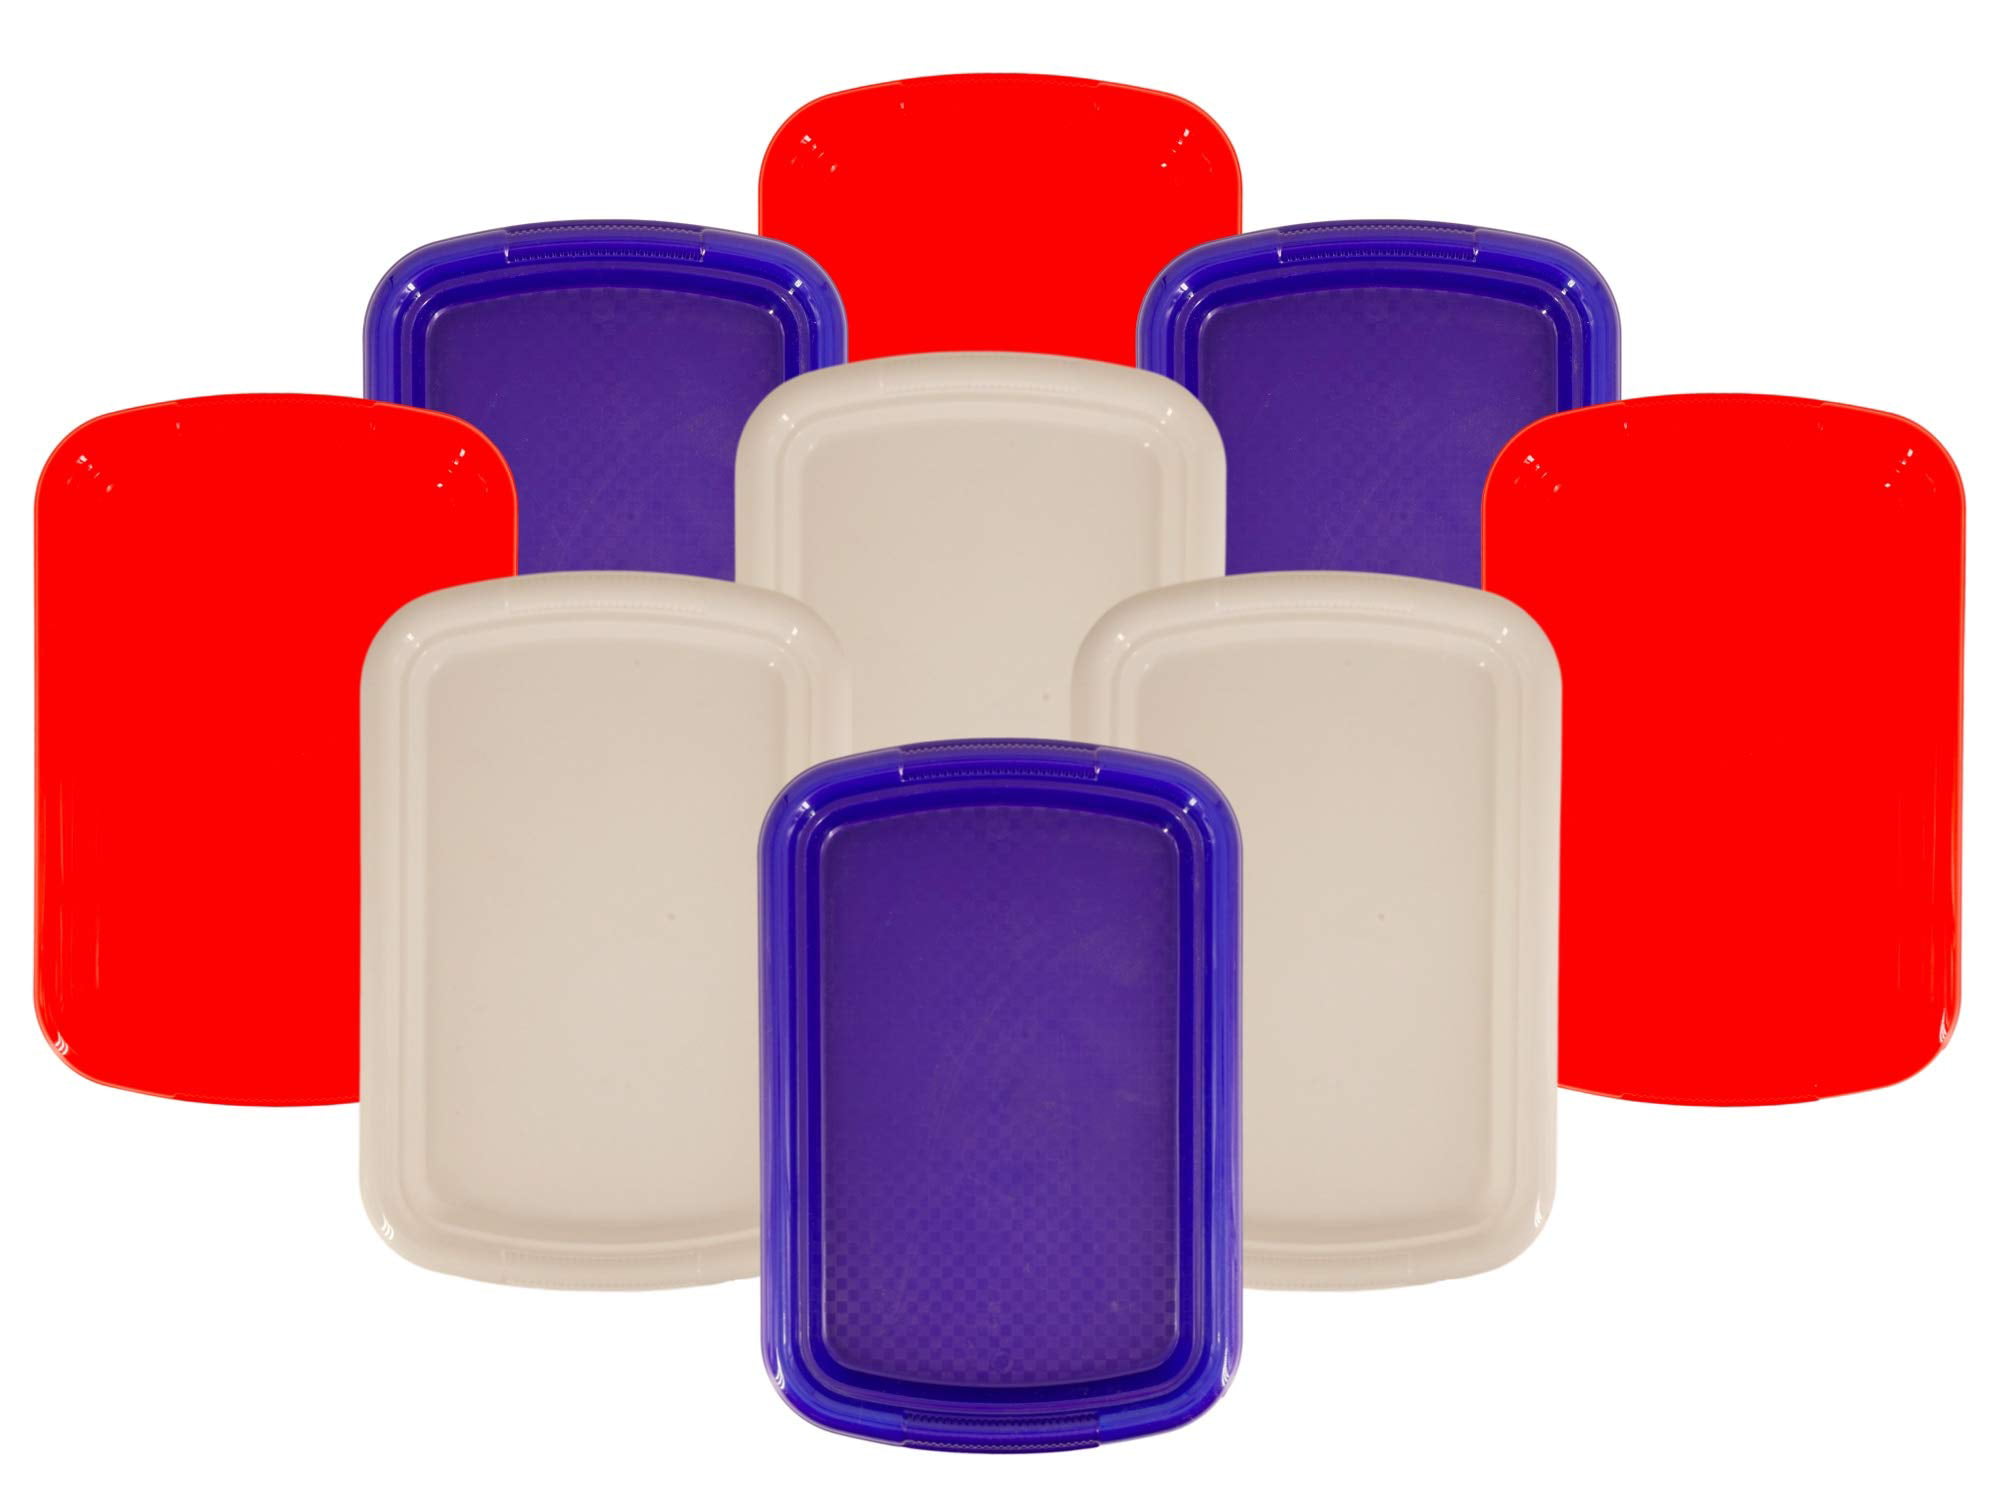 Details about  / Rectangular Plastic Trays 9 Trays - Red, White, Blue Measure 15.4 in x 10.4